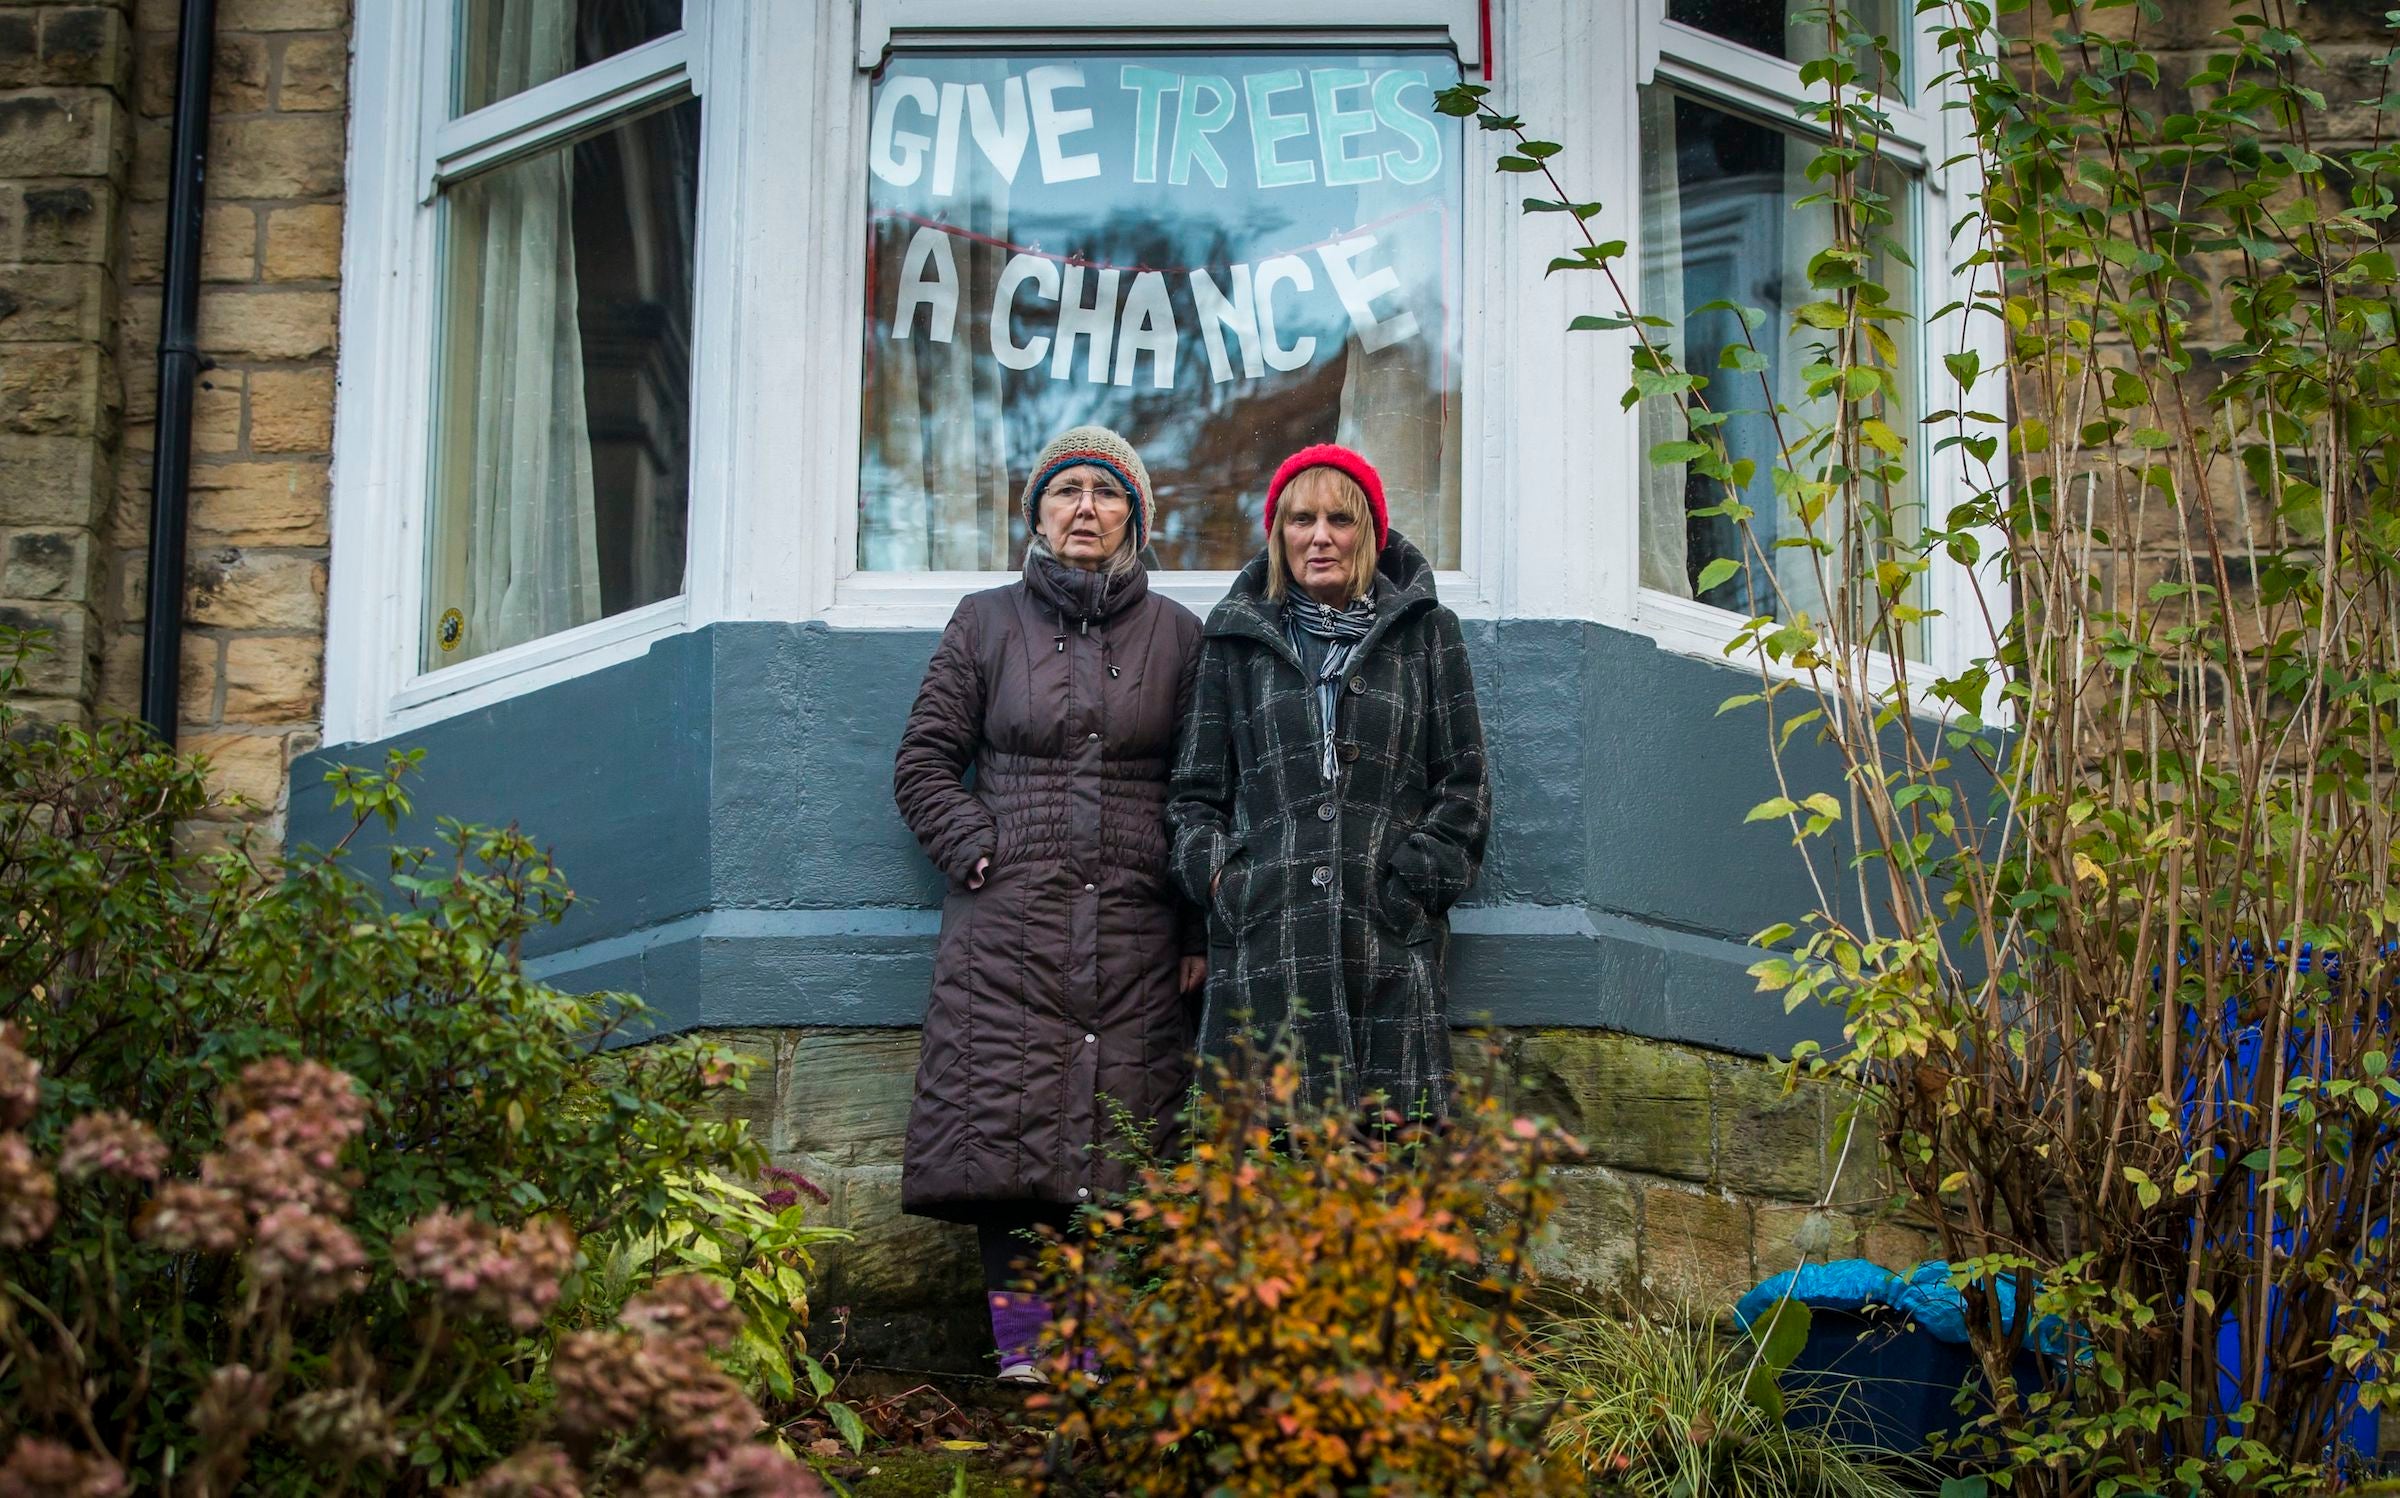 Jenny Hockey (left) and Freda Brayshaw were arrested by police after protesting against the controversial tree-felling programme